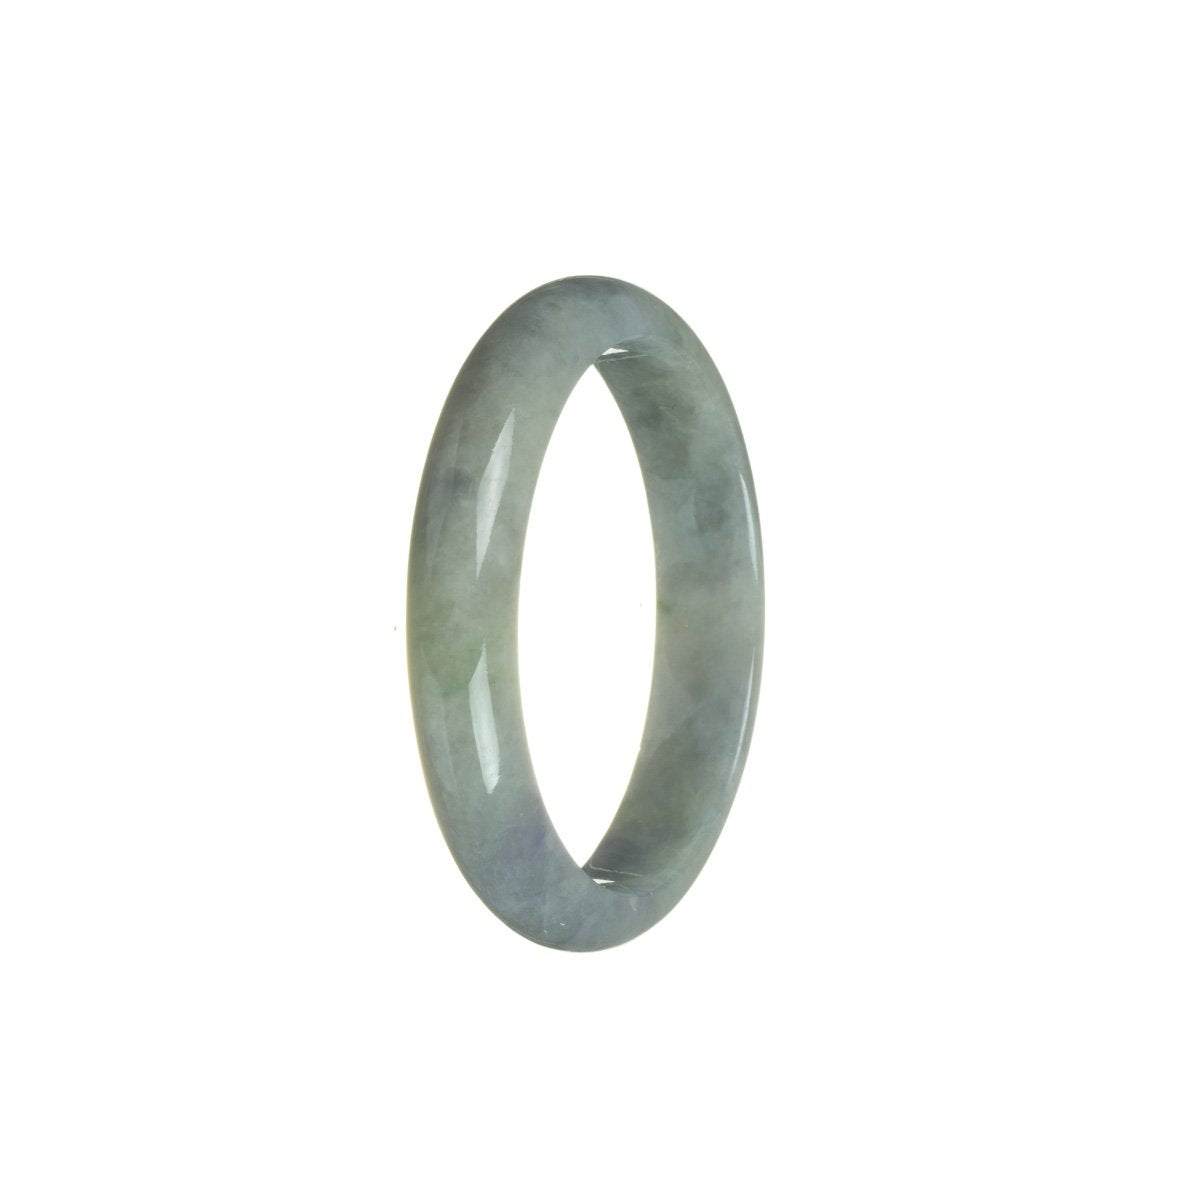 A half-moon shaped, 52mm Burmese Jade bangle with authentic Type A Green color, featuring beautiful lavender and grey tones. Handcrafted by MAYS™.